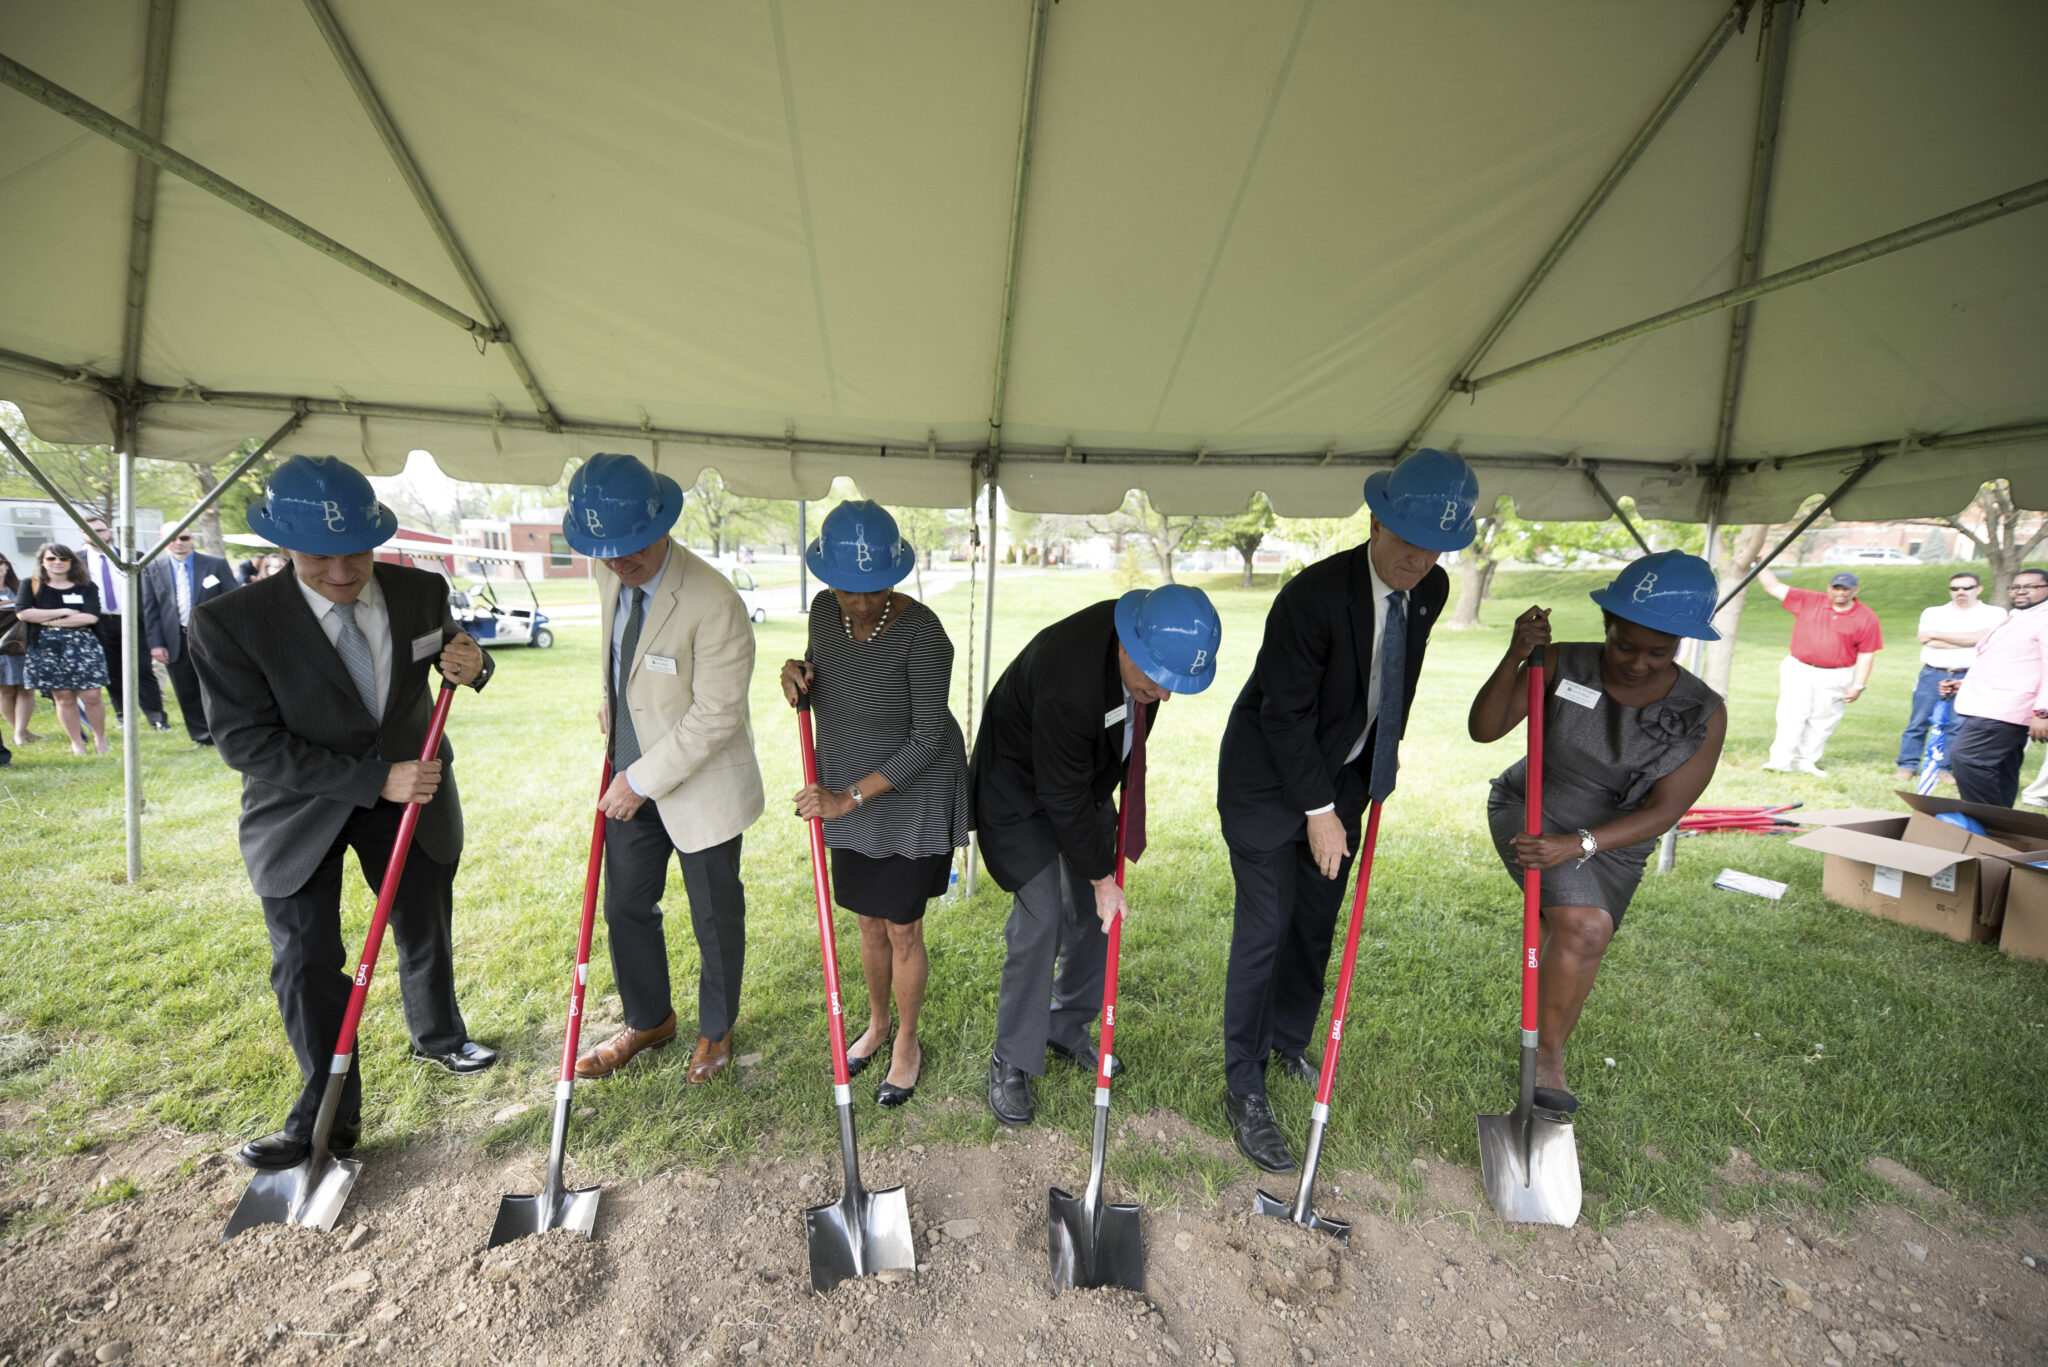 Photo of Trustess and College AC members breaking ground with shovels and hard hats